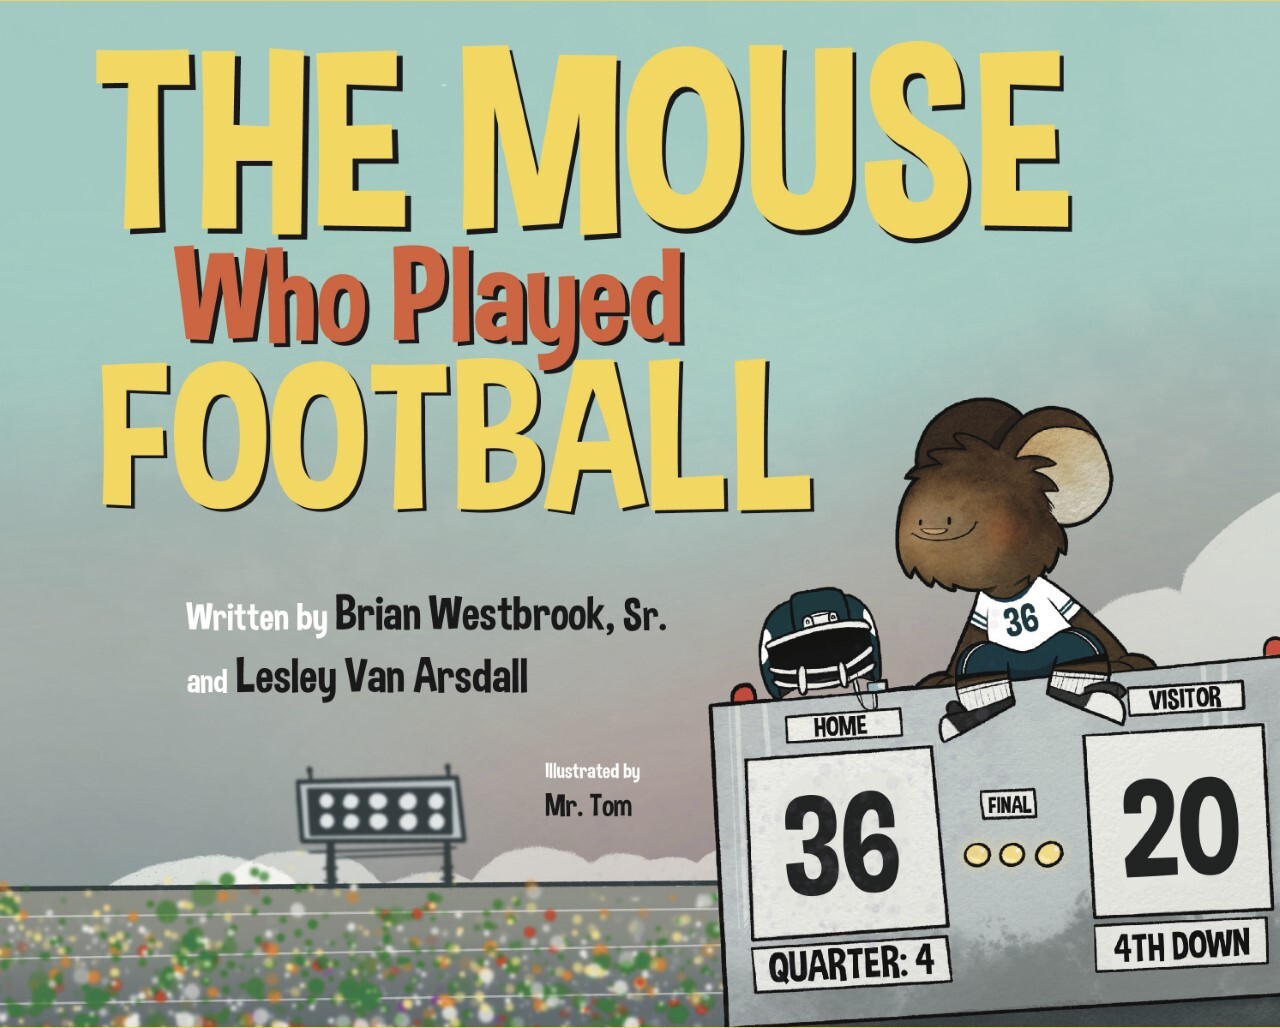 Eagles running back Brian Westbrook was relatively small for a football player. He tells his story in a picture book about a mouse with big dreams. 